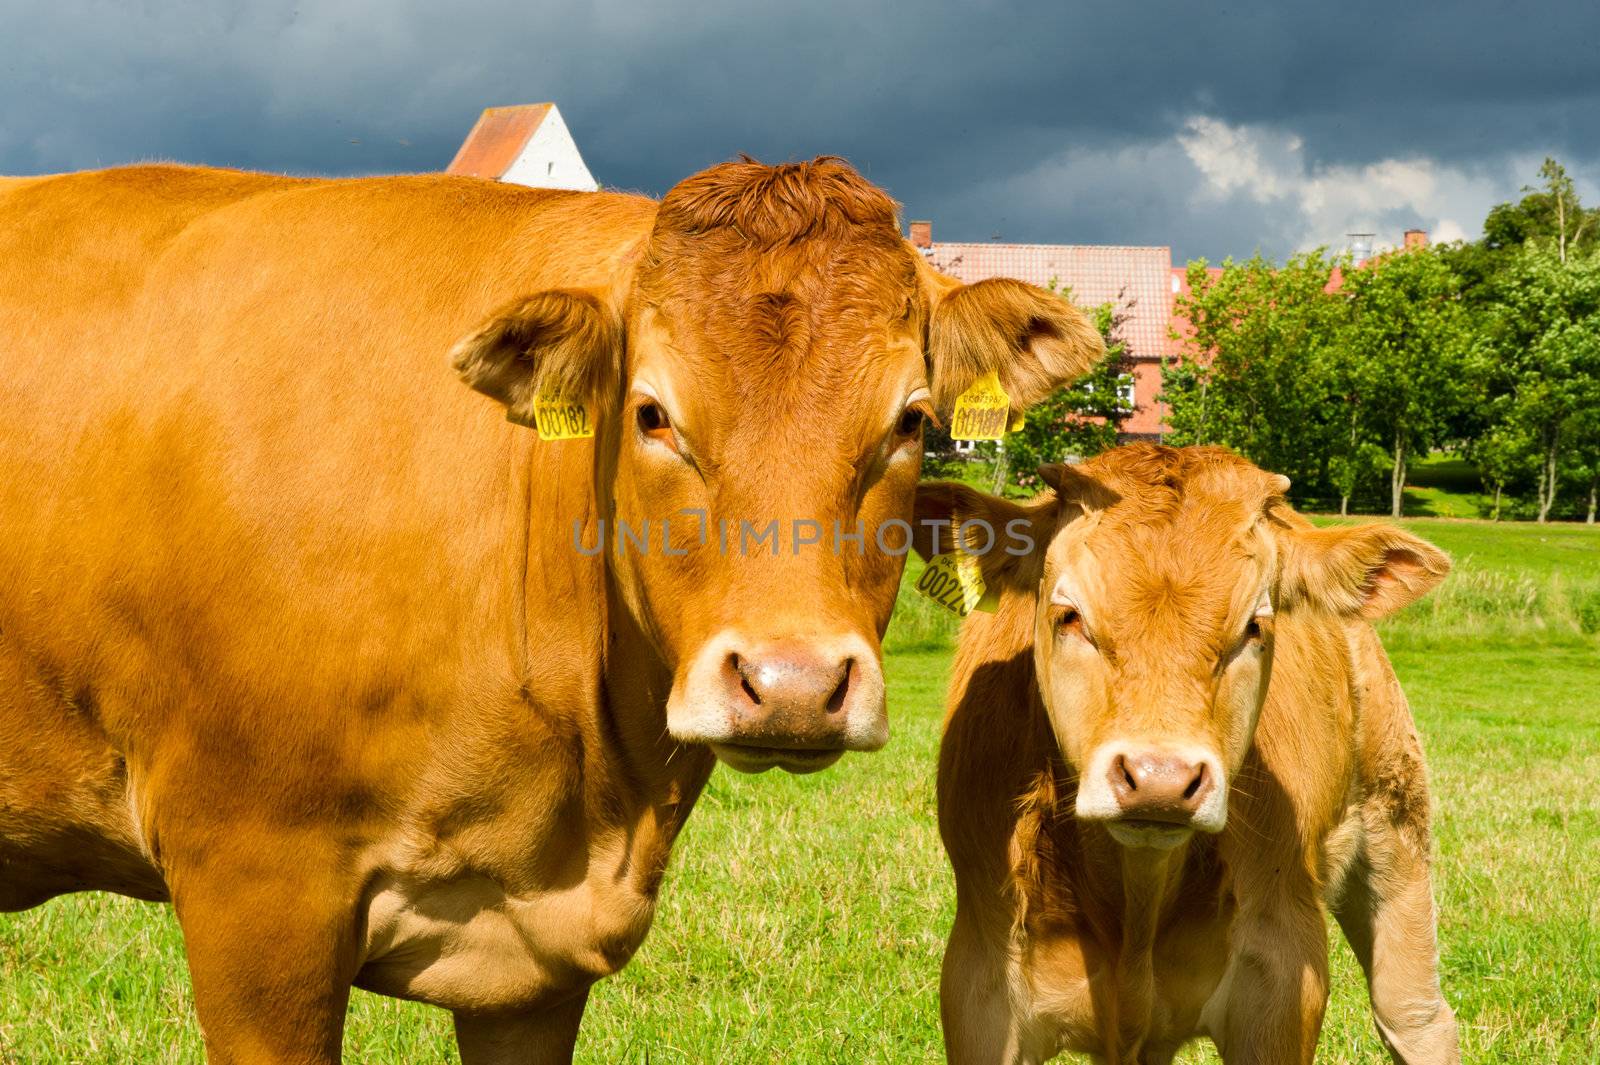 Limousine Cows by MOELLERTHOMSEN